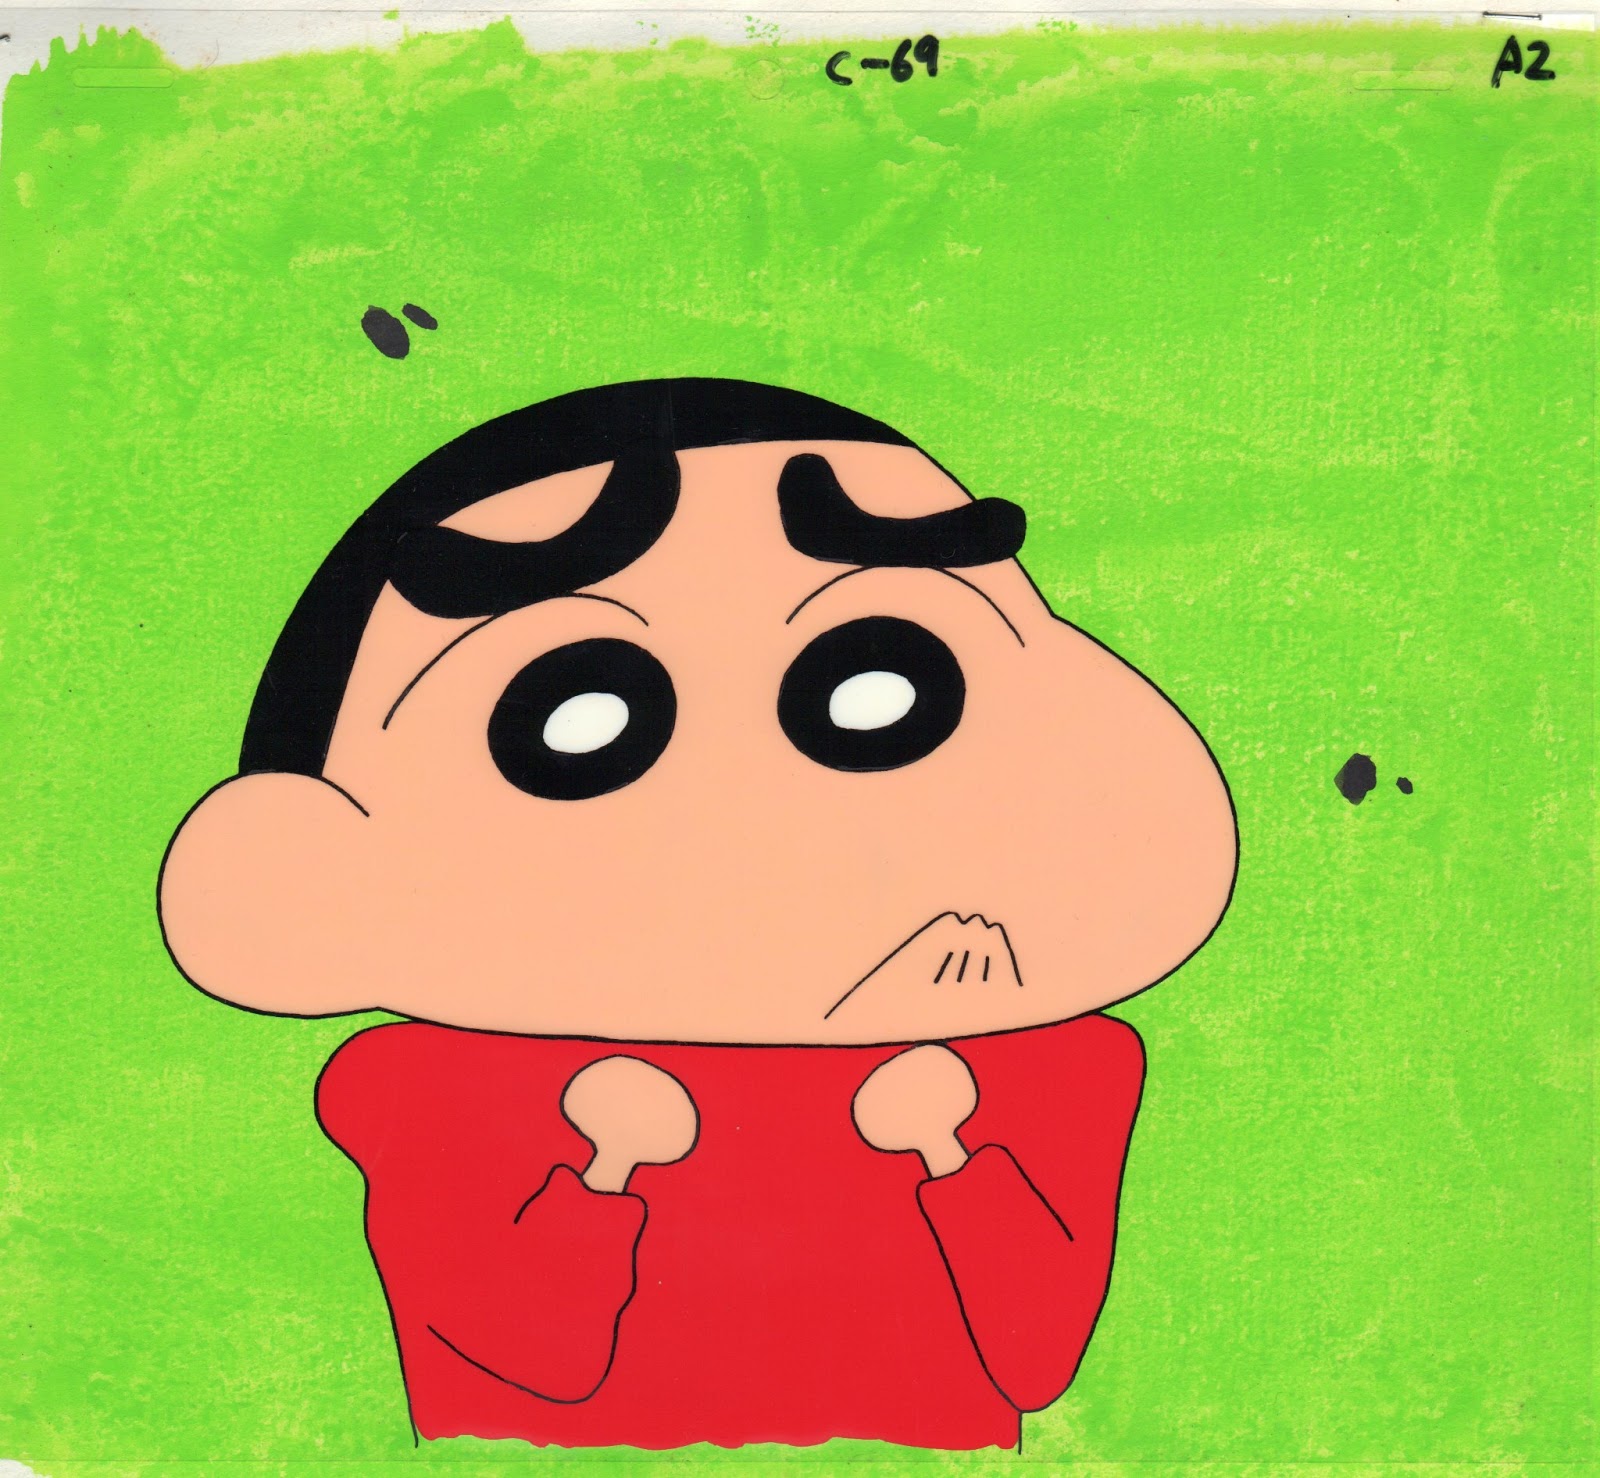 Download this Shin Chan picture